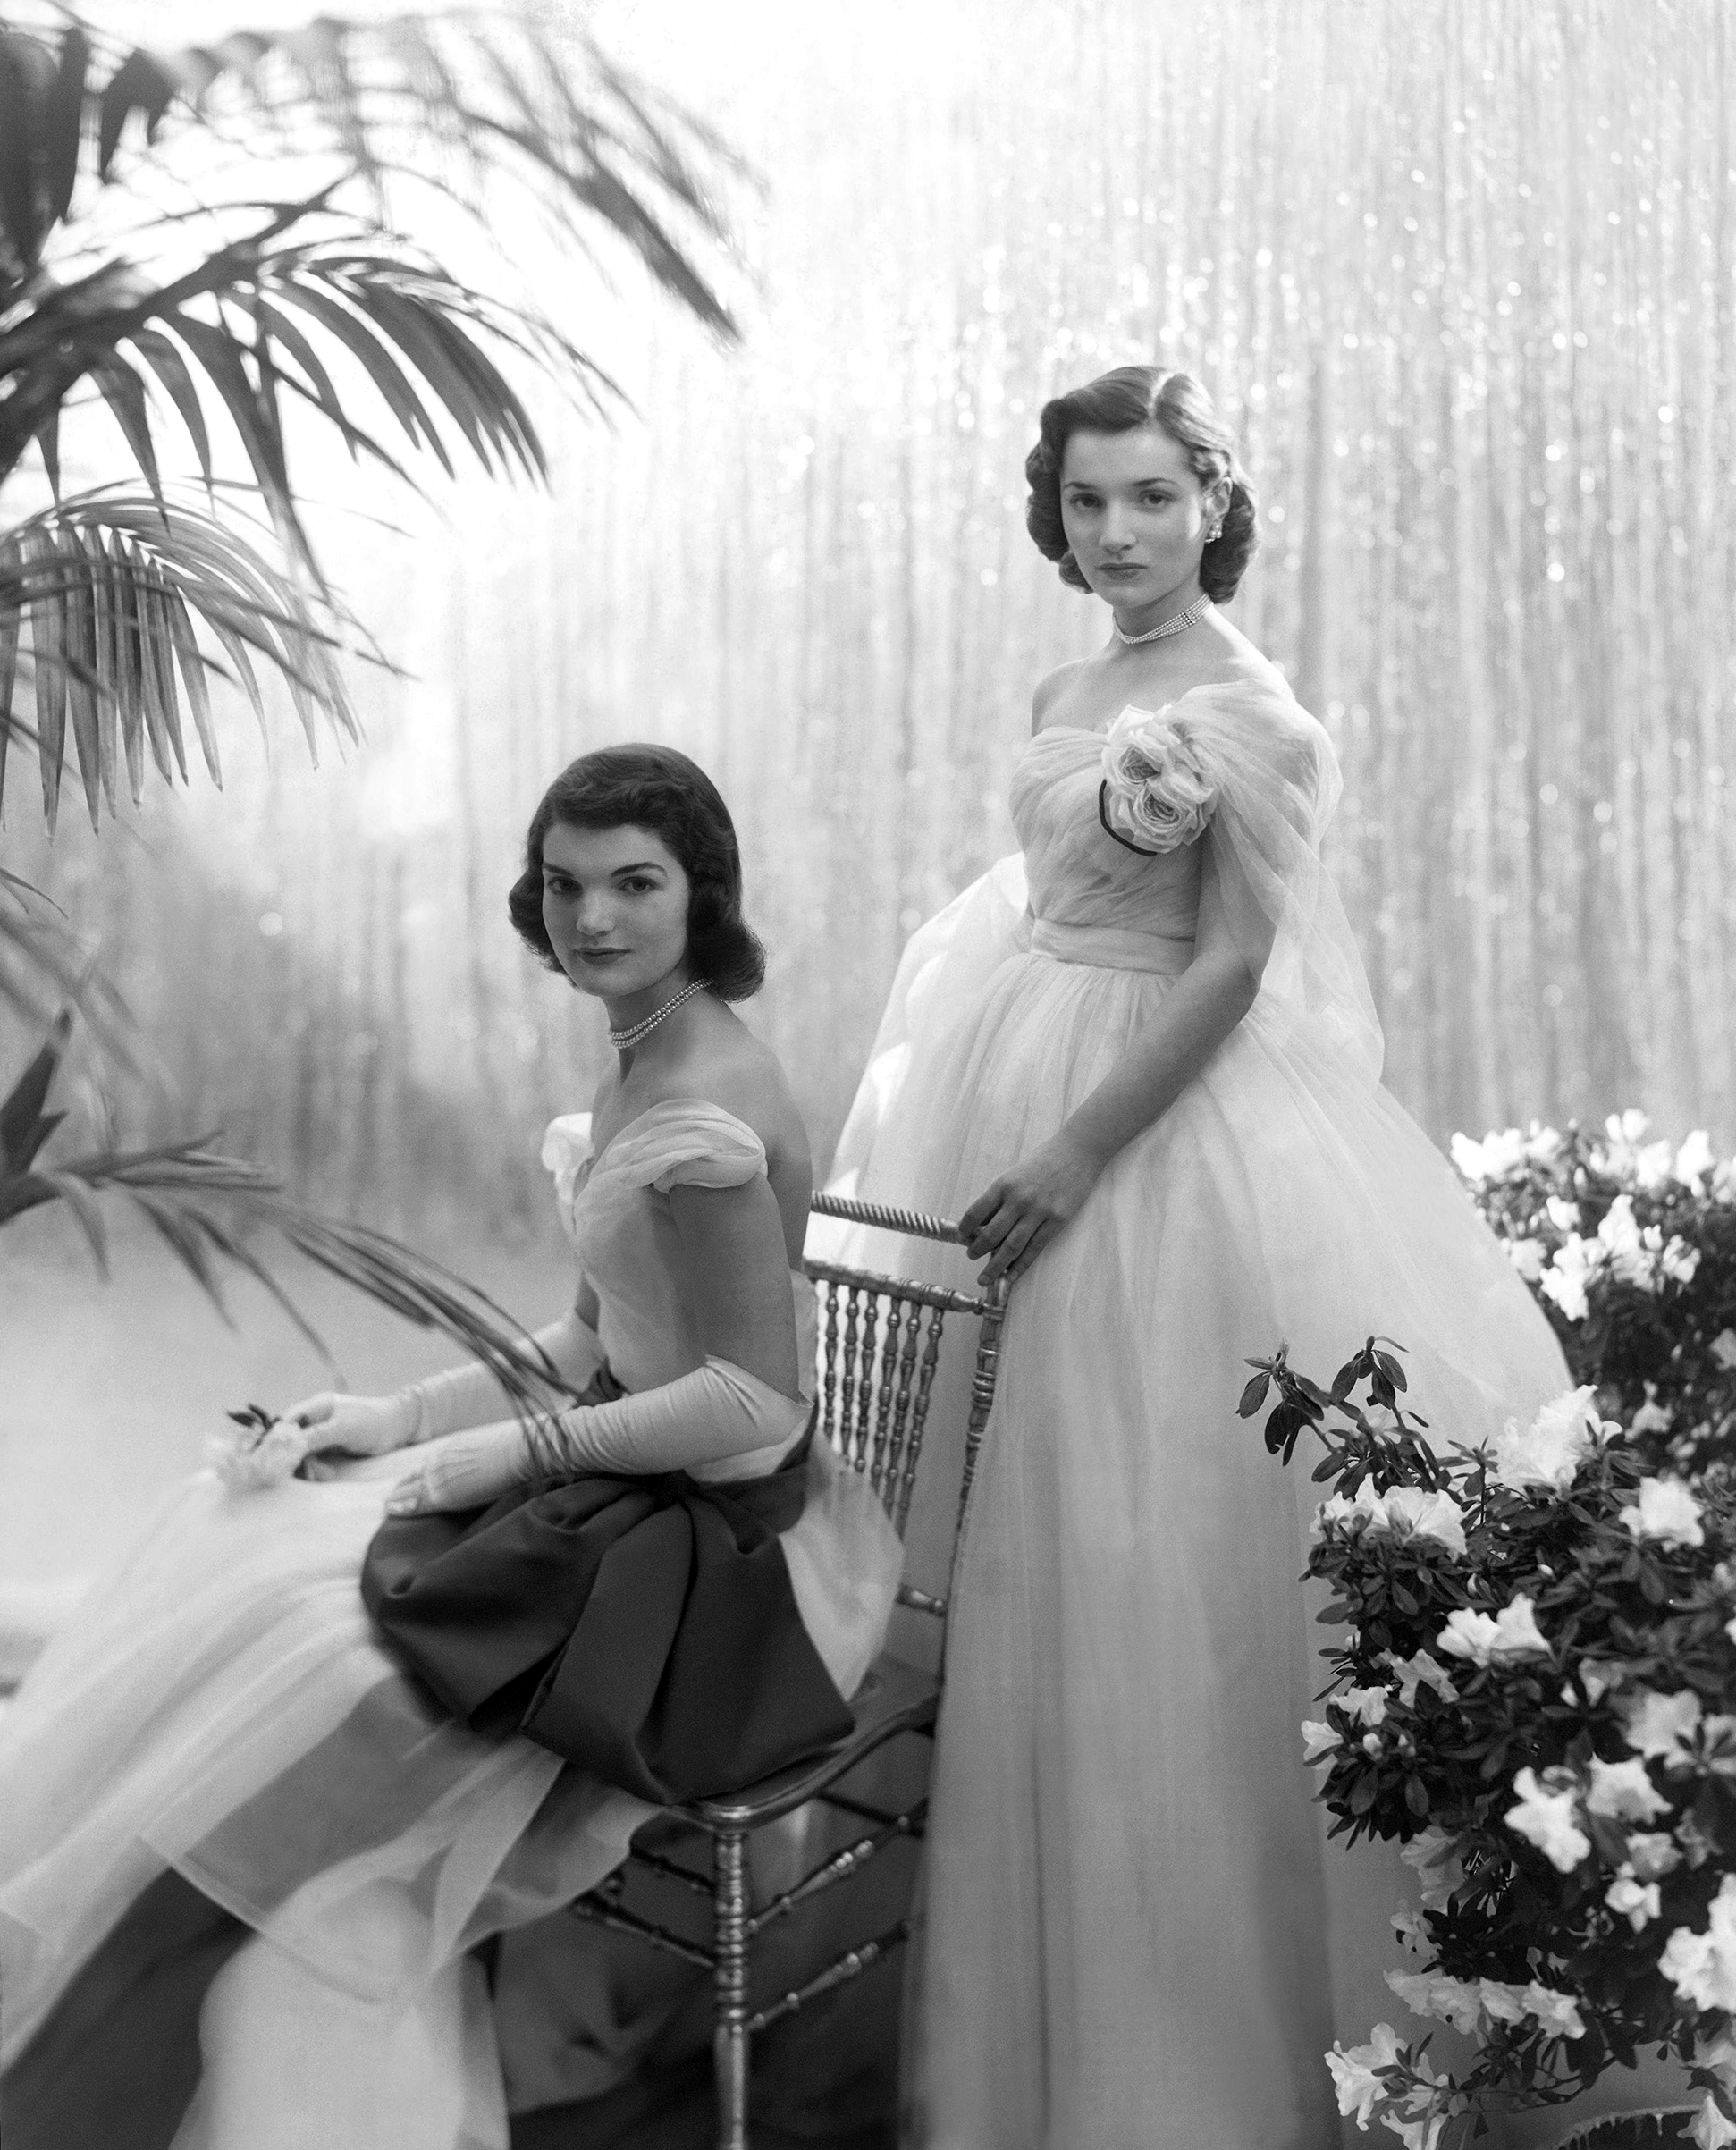 Jacqueline Bouvier (later Jacqueline Kennedy Onassis), seated, with her sister Caroline Lee Bouvier, standing behind her, wearing ball gowns, 1951.